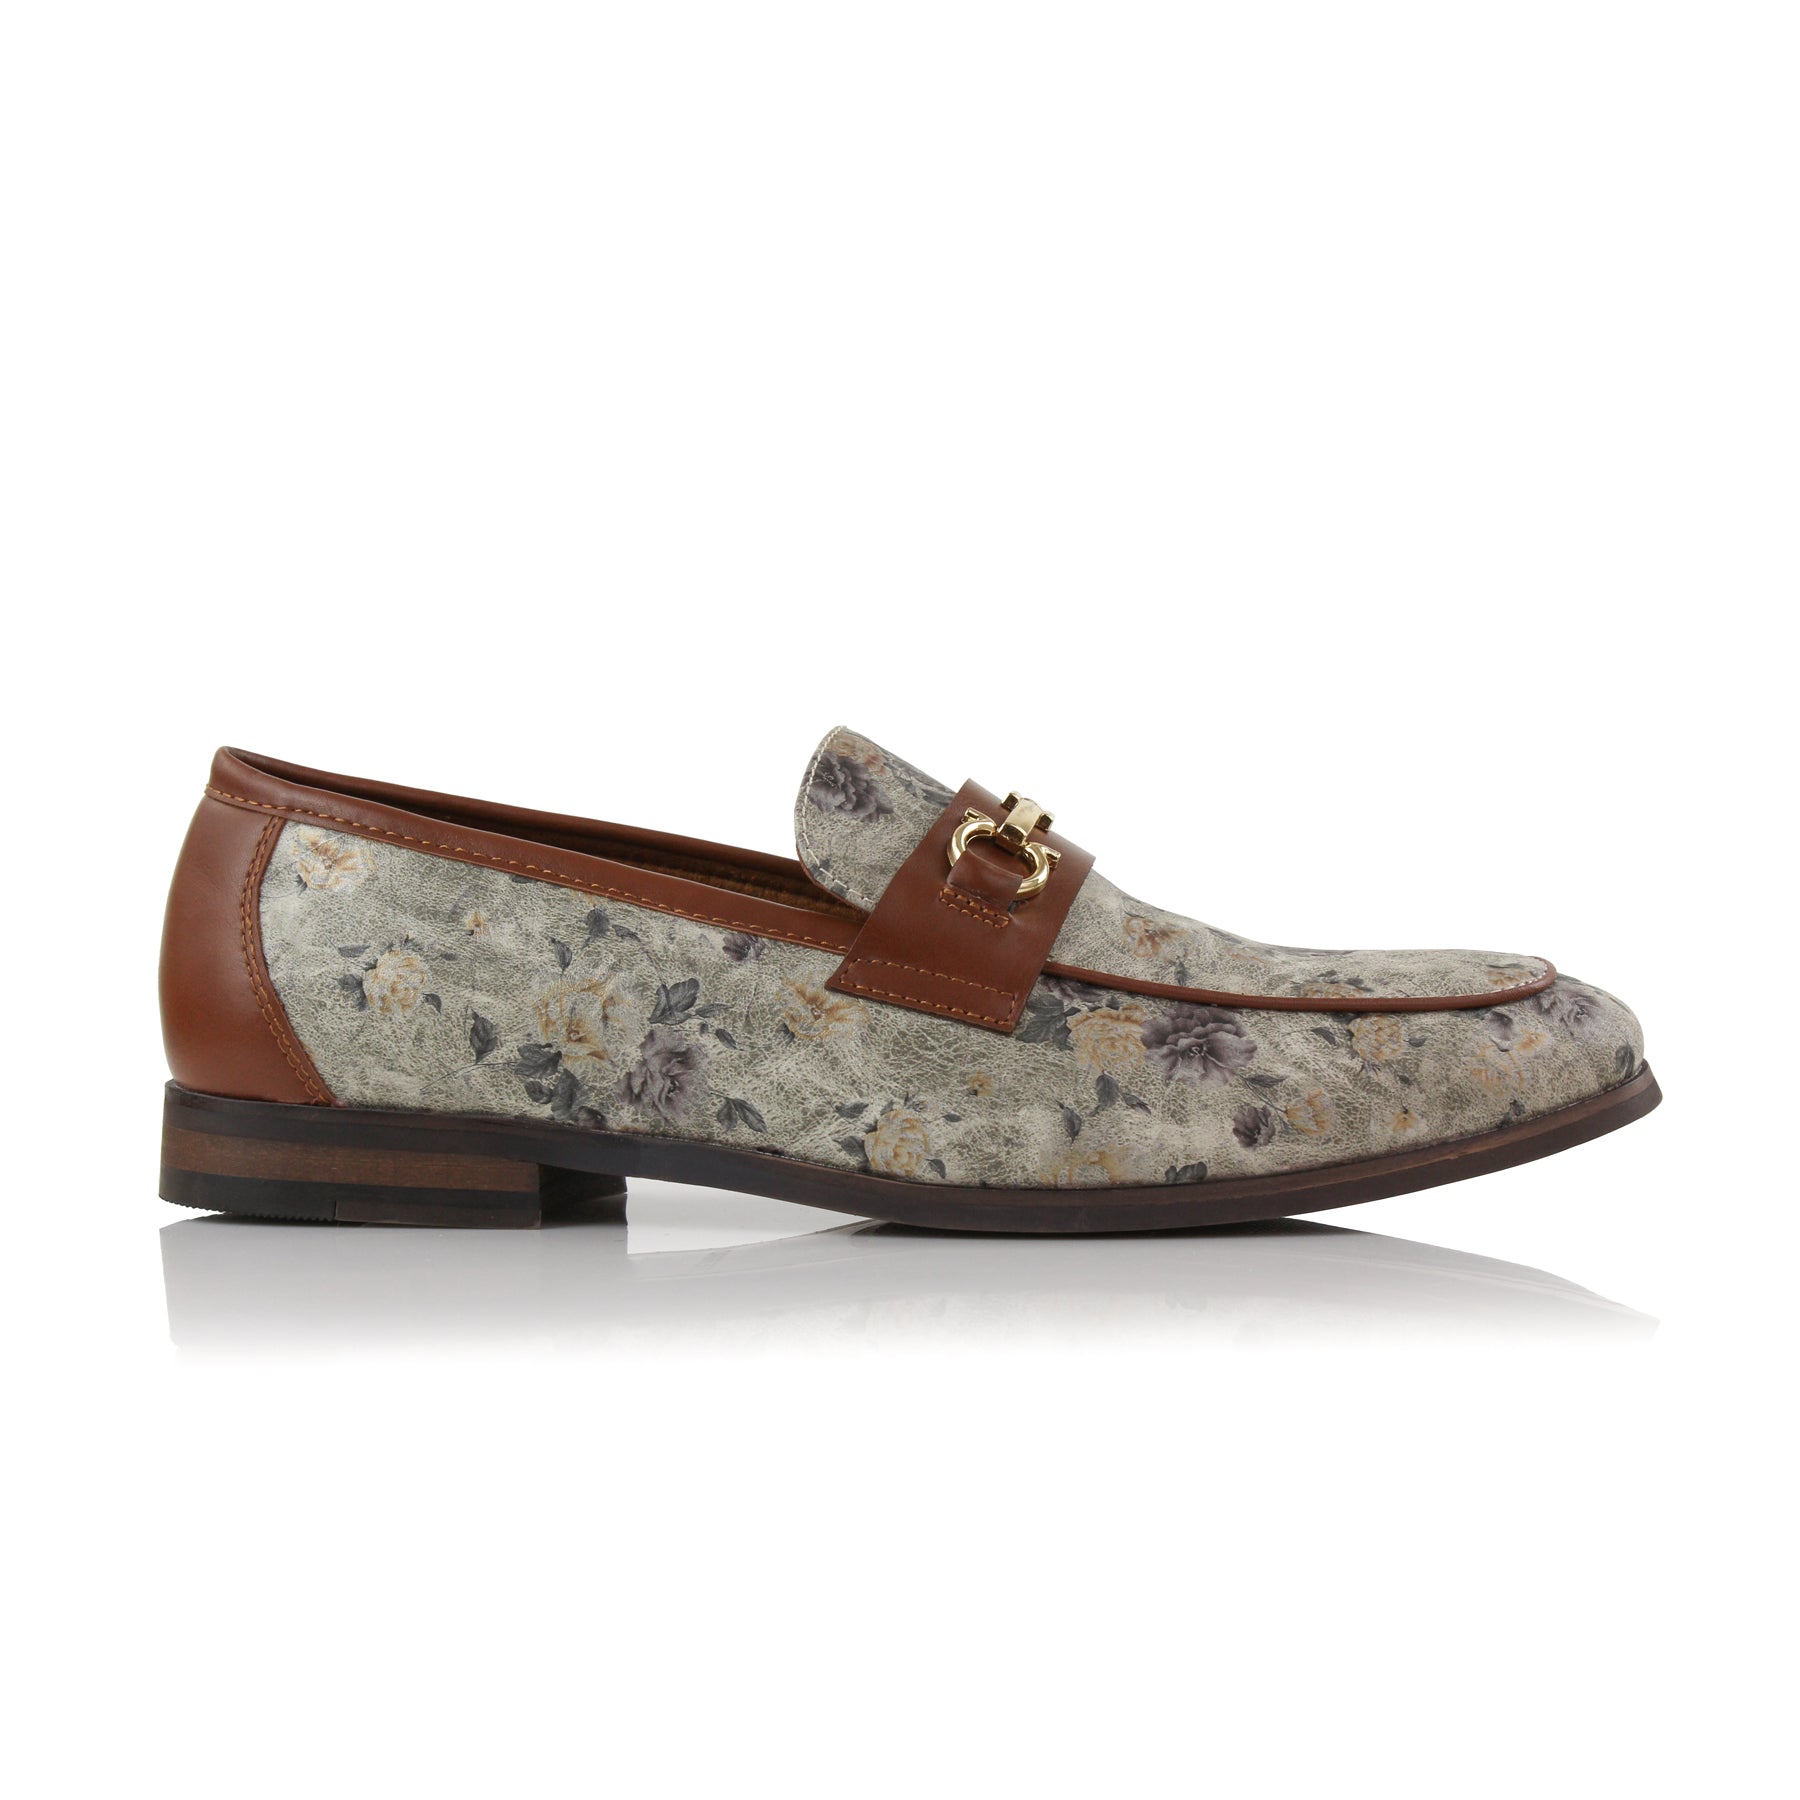 Floral Vegan Loafers | Darrell by Ferro Aldo | Conal Footwear | Outer Side Angle View